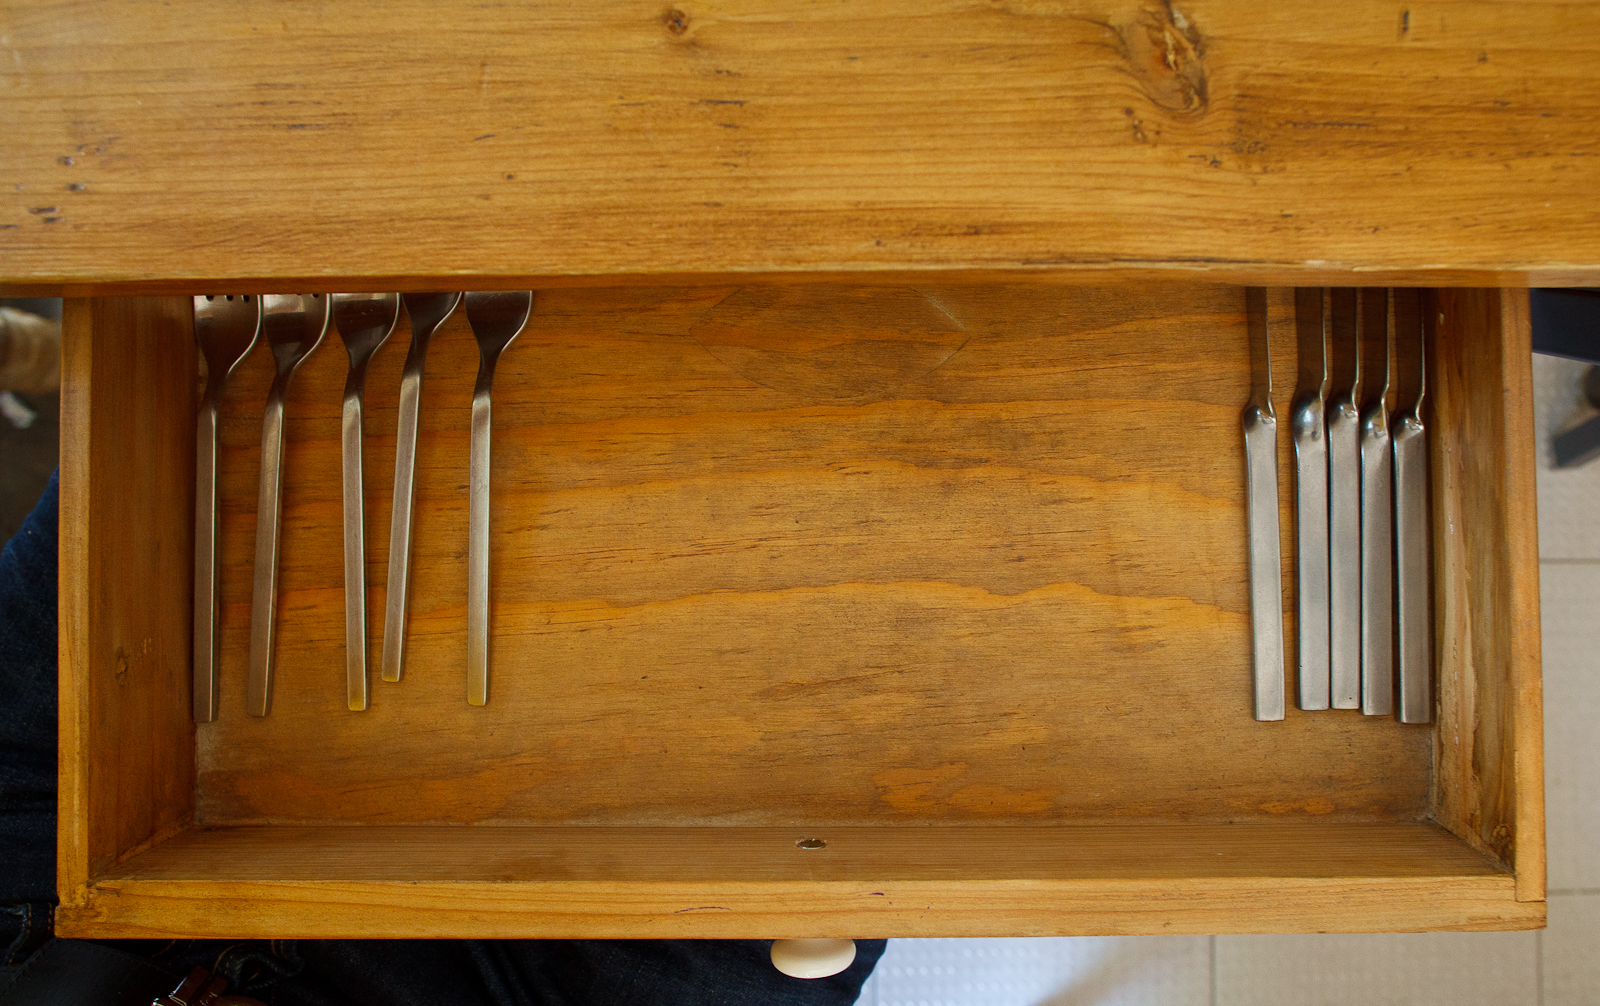 Drawer of forks and knives